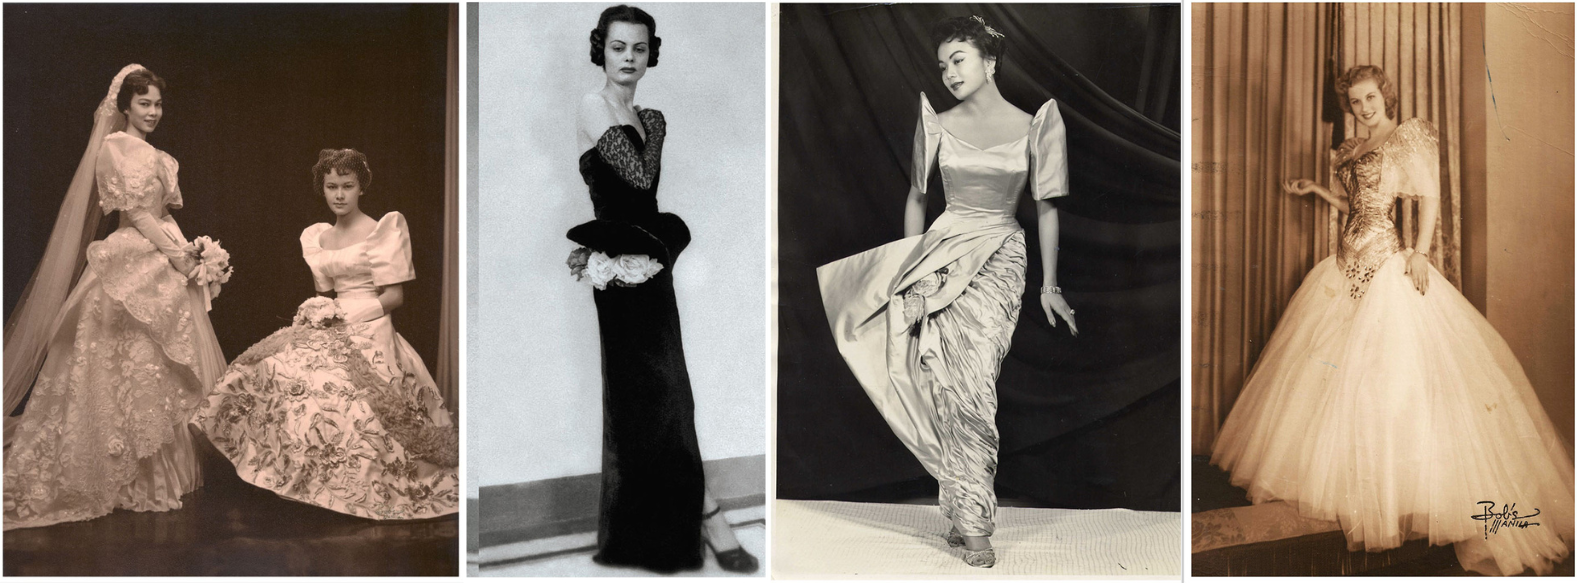 Turning to art after WWII: The fashion legacy of National Artist Salvacion Lim “Slim” Higgins